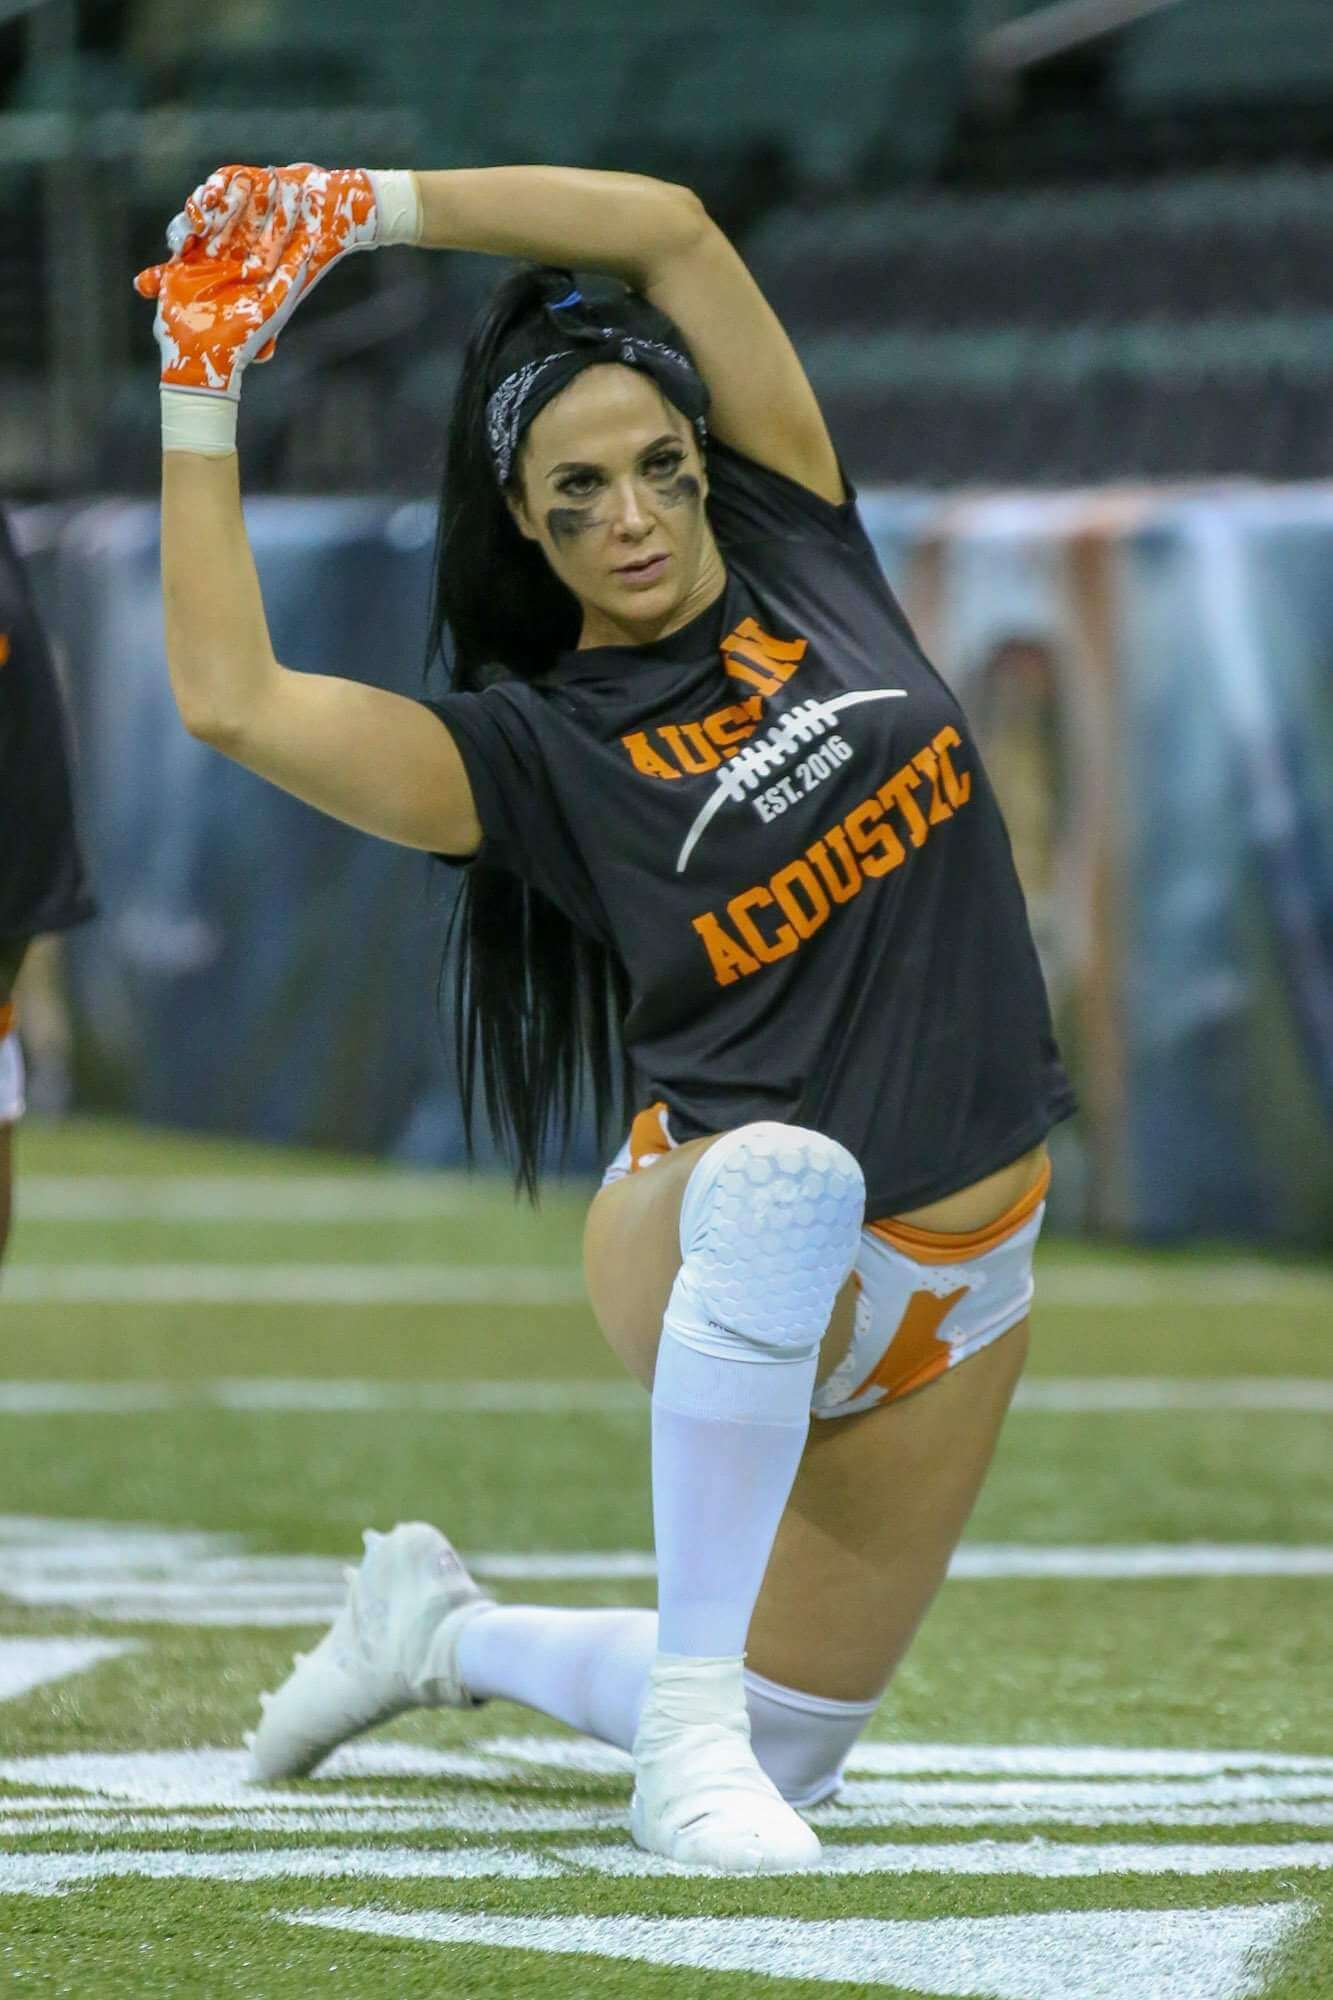 The Legends Football League Beautiful Women And Football, Need We Say Anymore! 29